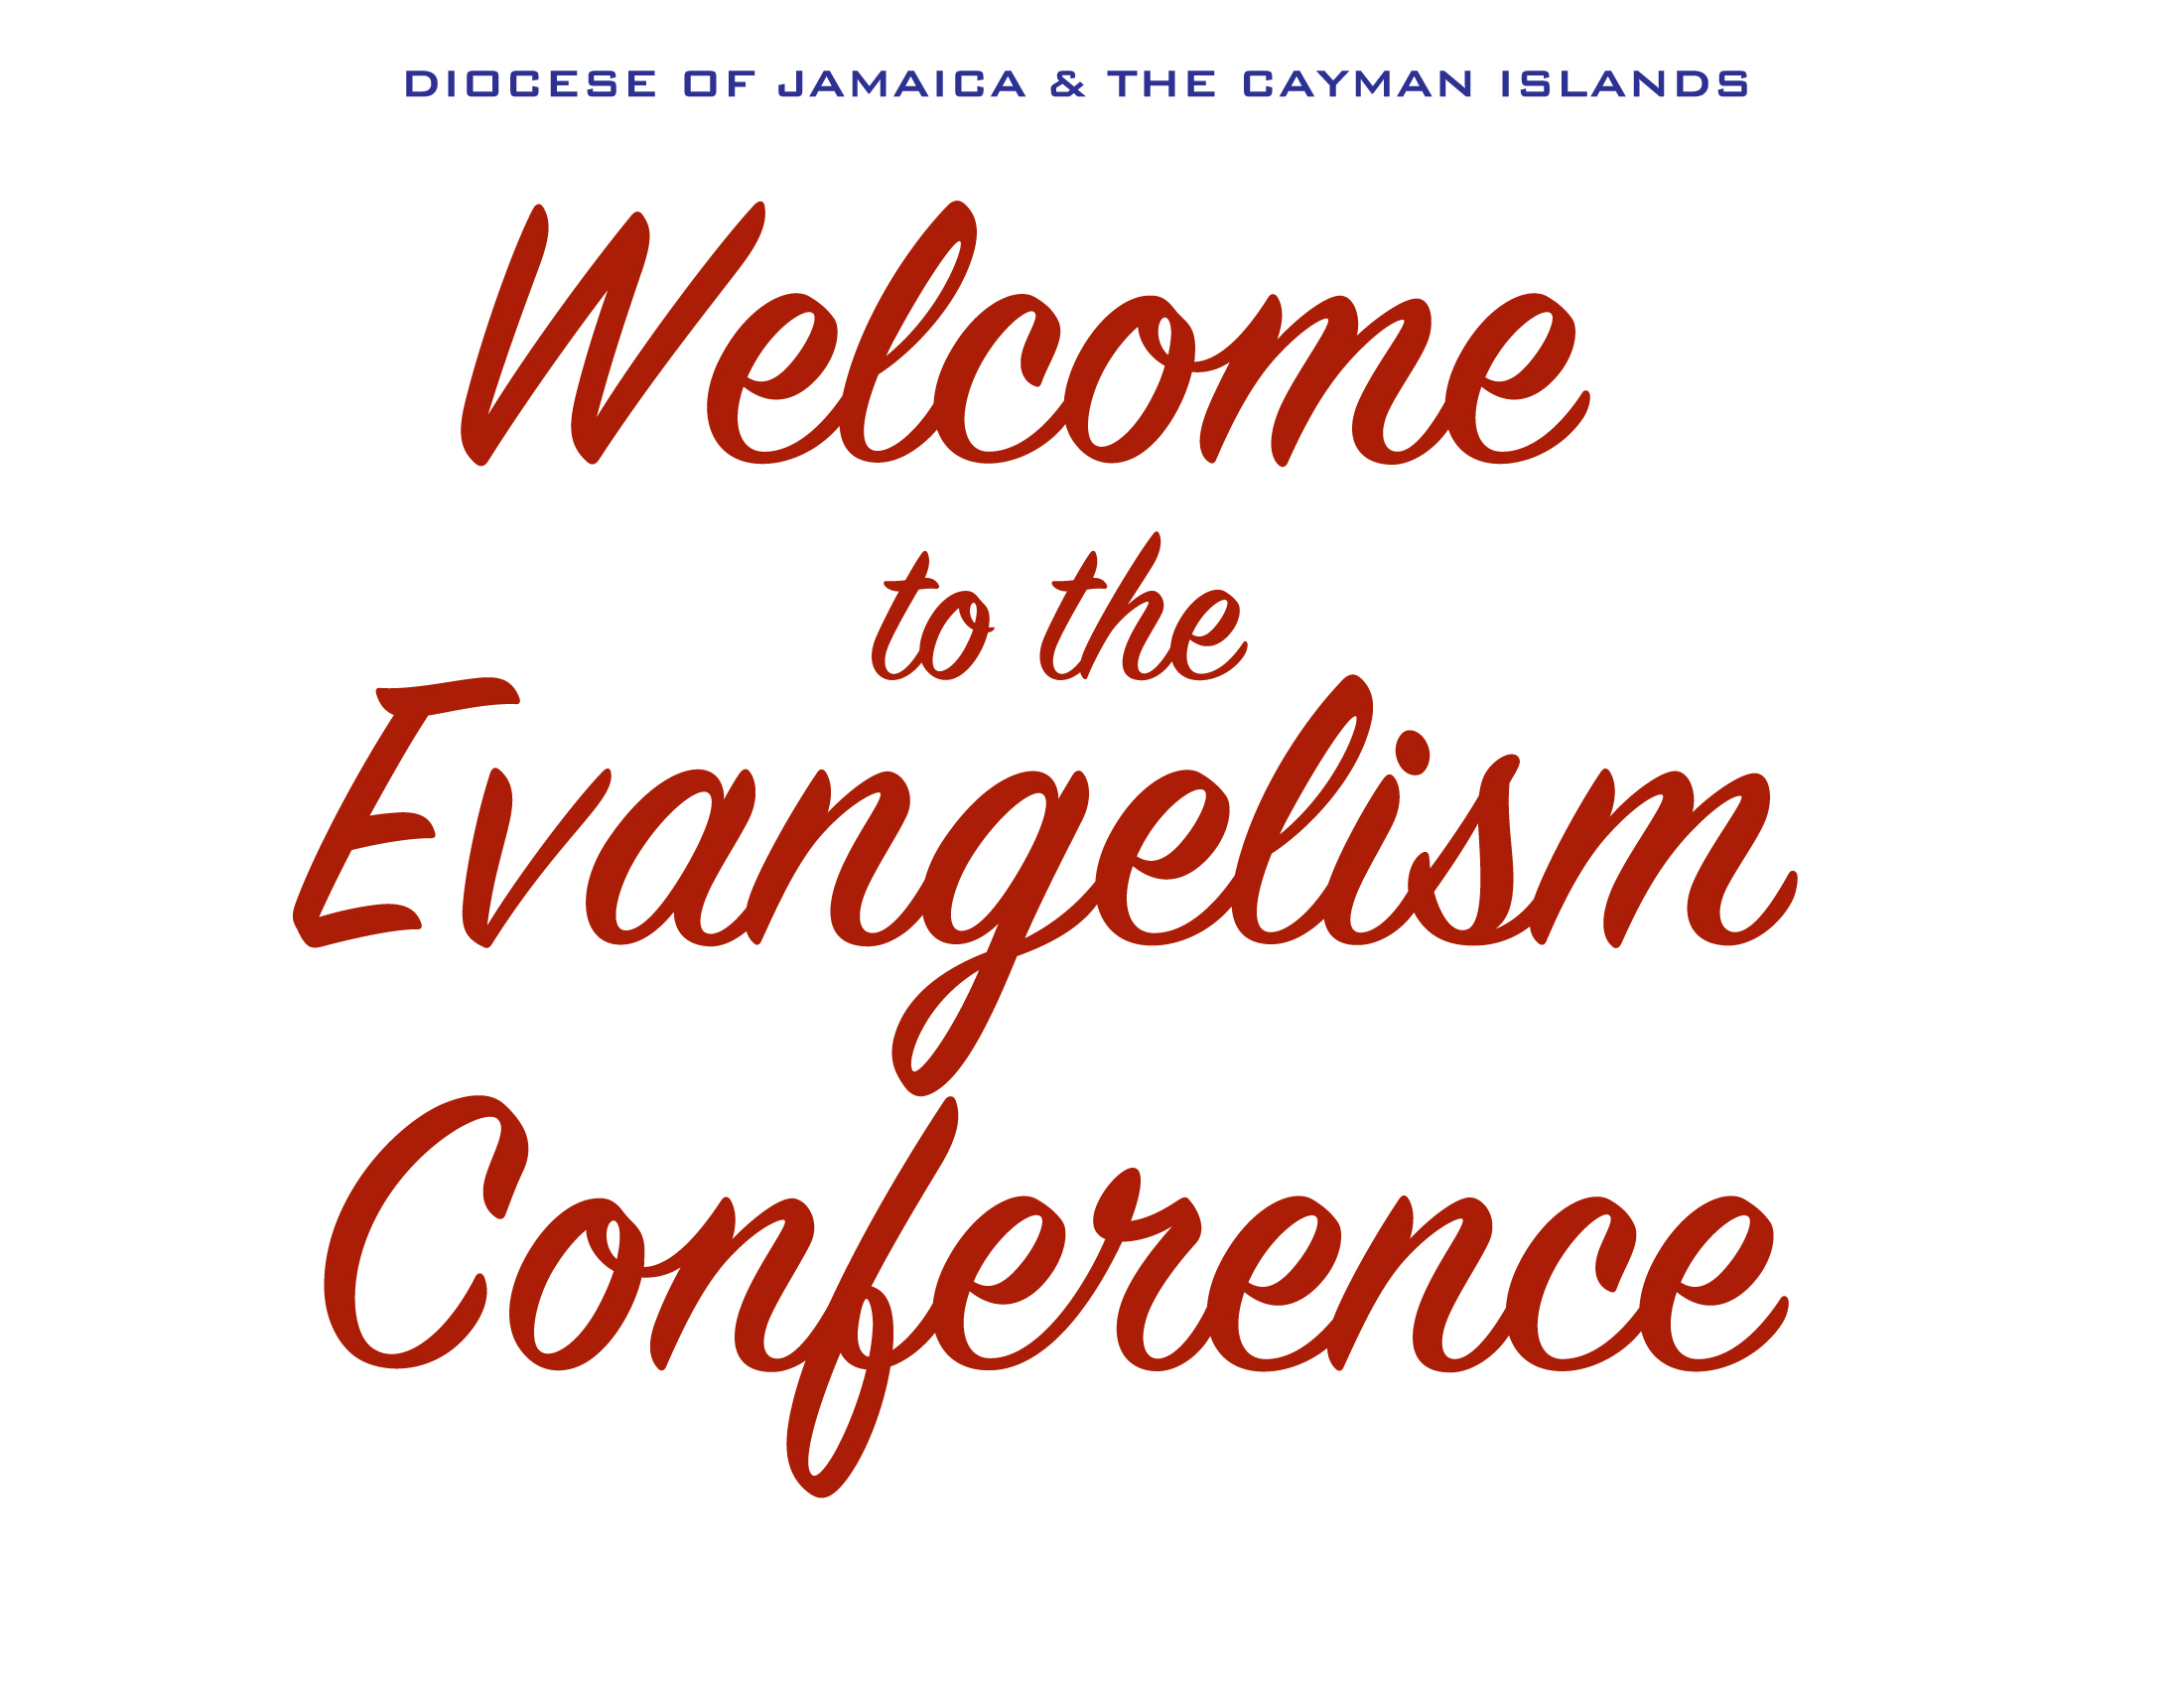 Church Army Evangelism Conference – Welcome Address